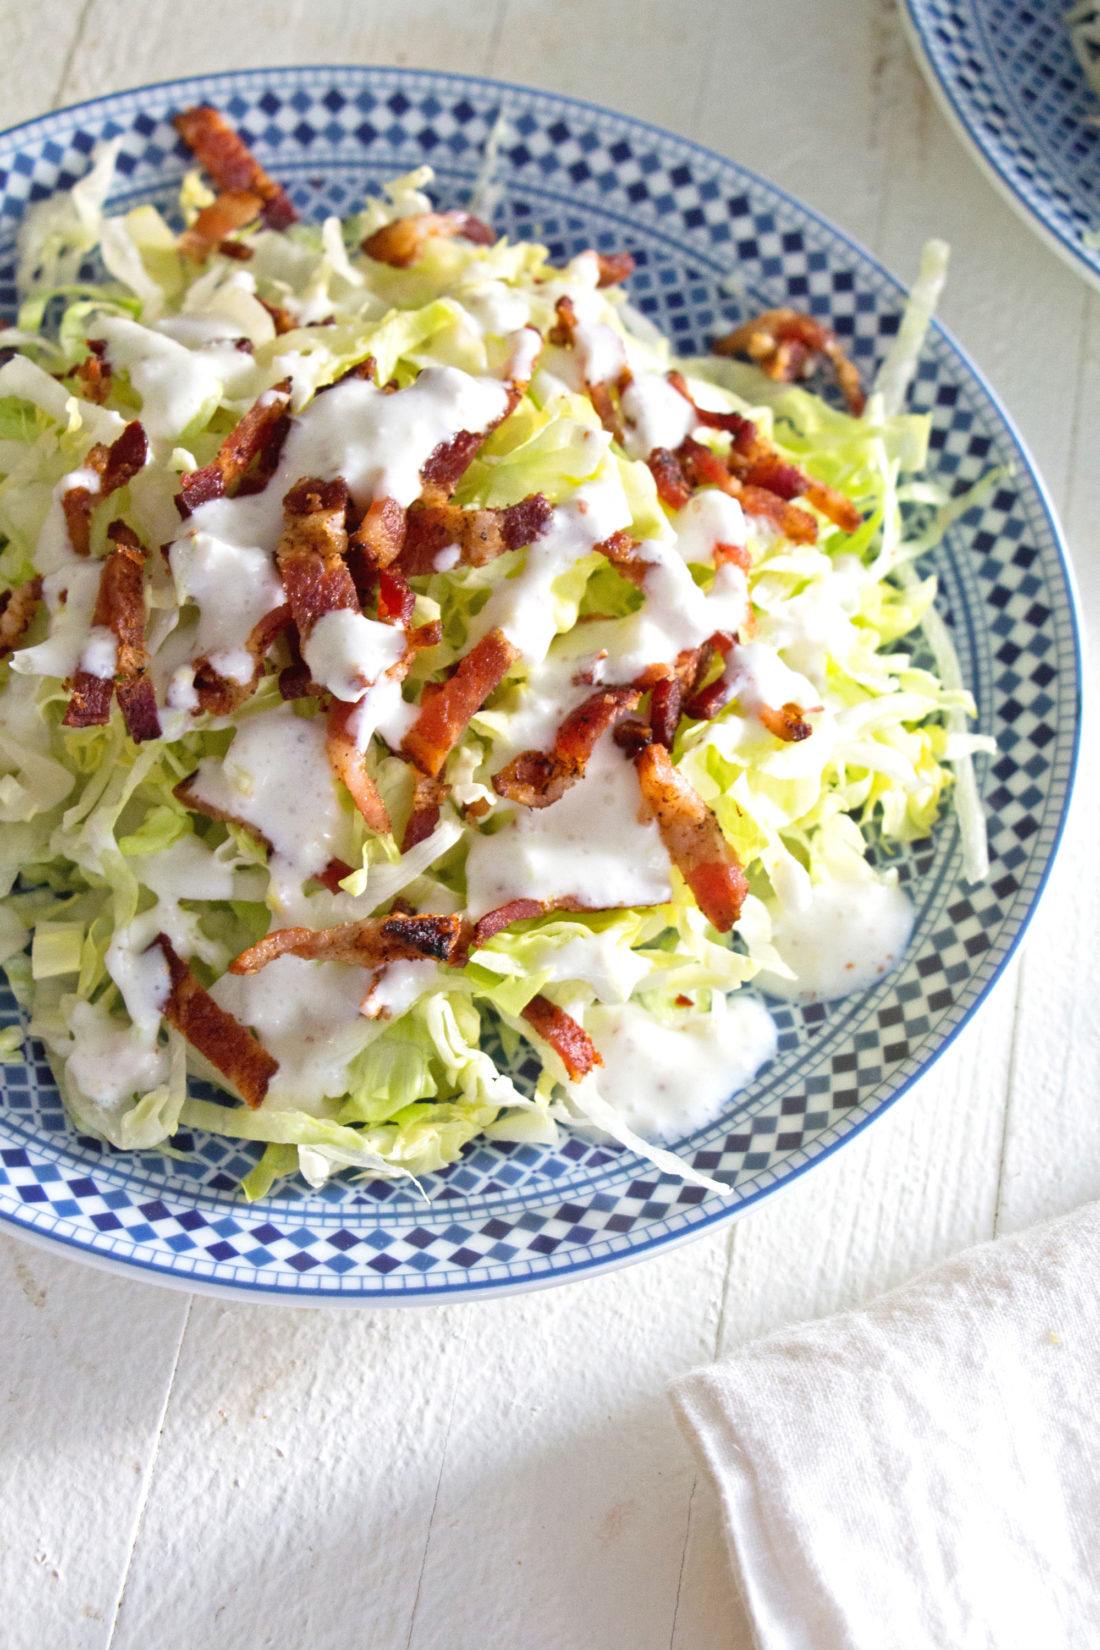 Slivered Wedge Salad with Buttermilk Dressing and Bacon / Photo by Mandy Maxwell / Katie Workman / themom100.com